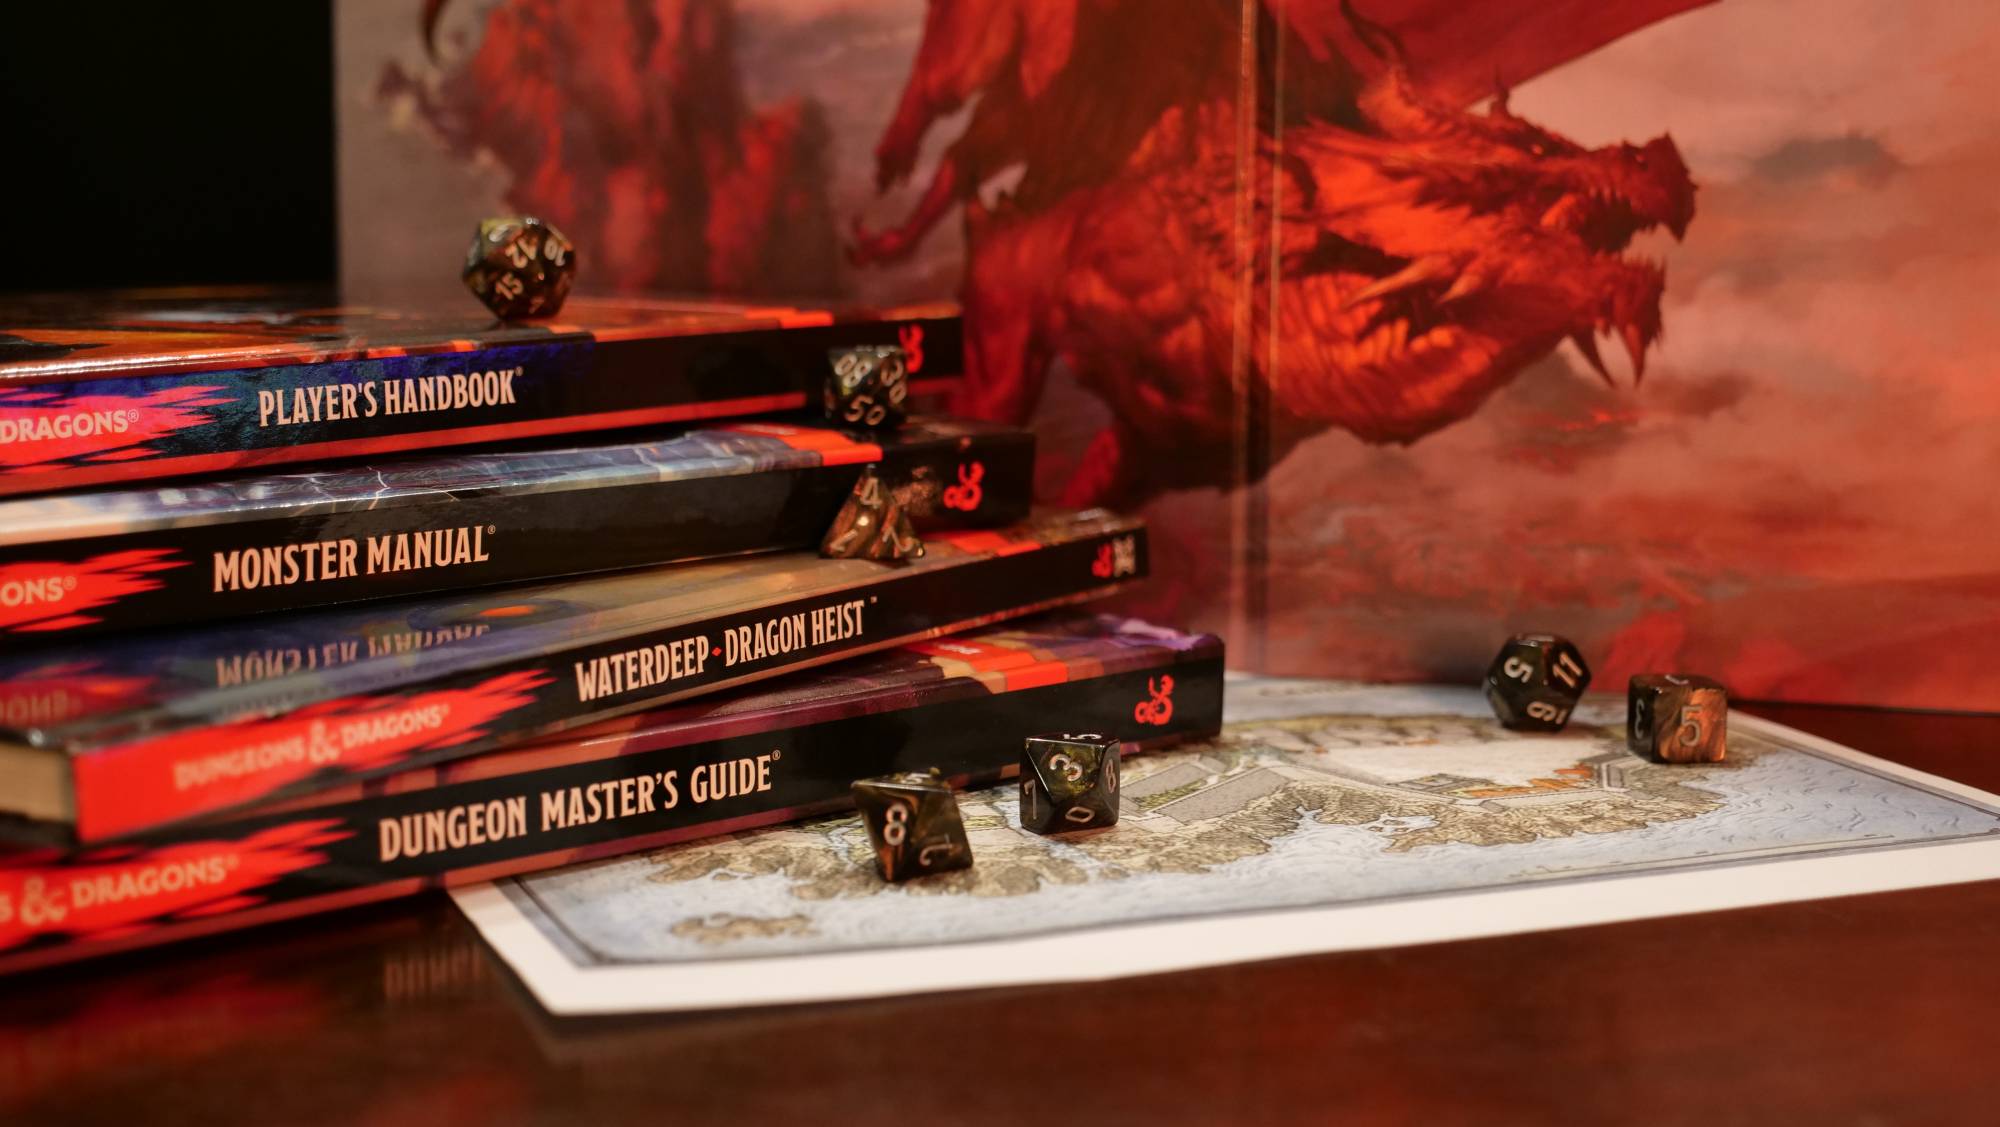 Dice resting on a stack of Dungeons and Dragons sourcebooks including the Players Handbook, the Monster Manual, Waterdeep - Dragon Heist, and the Dungeon Master's Guide. Under the stack is a map of Candlekeep, and in the background is a Dungeons and Dragons 5e DM screen.